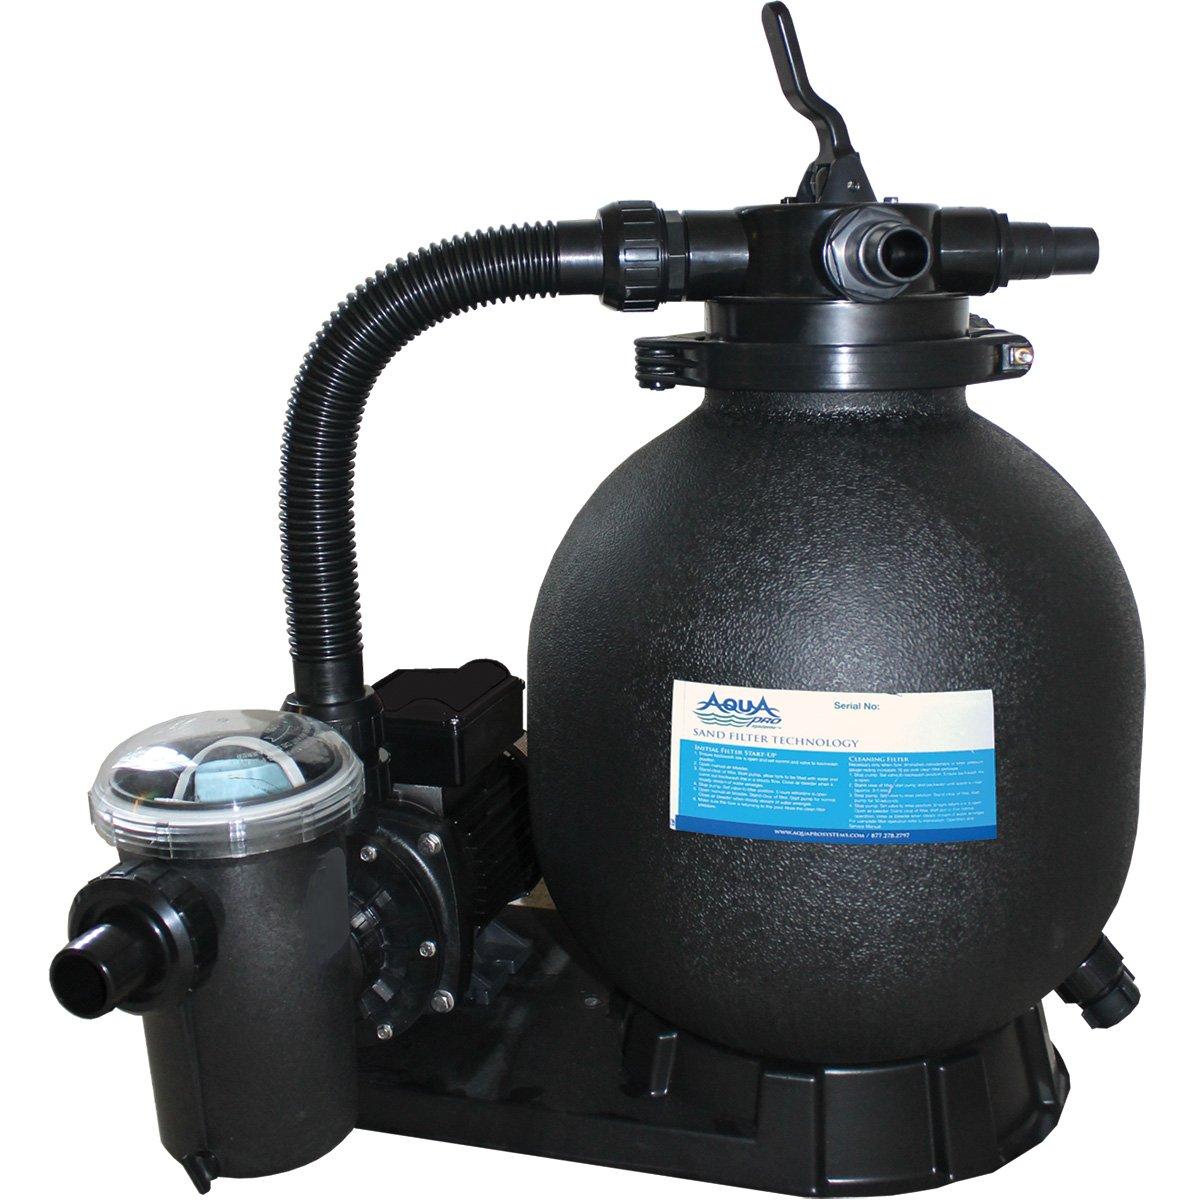 Aquapro - 15 Sand Filter & 1HP Single Speed Pump Above Ground Pool Combo